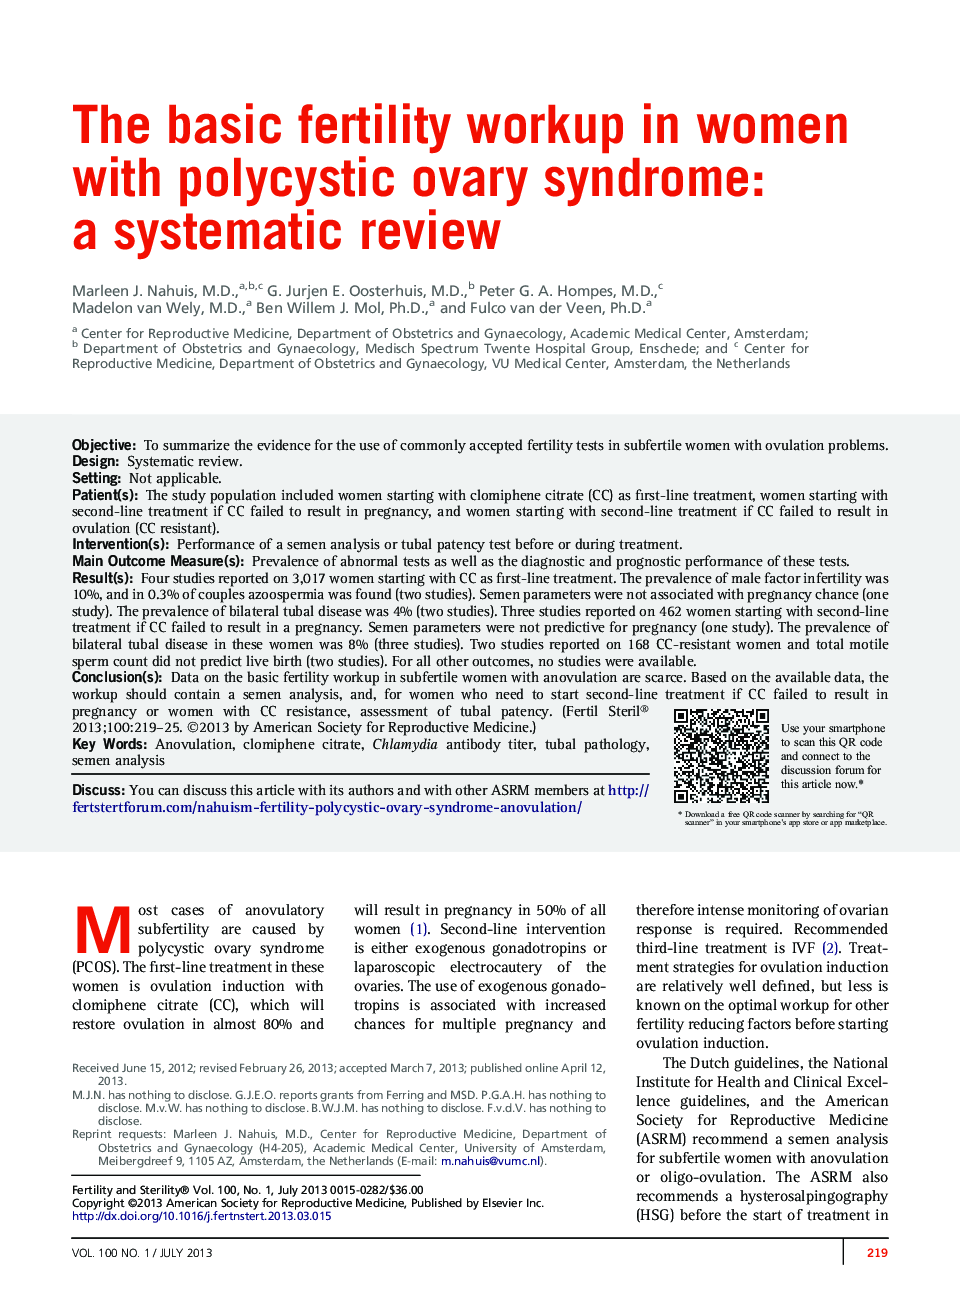 The basic fertility workup in women with polycystic ovary syndrome: a systematic review